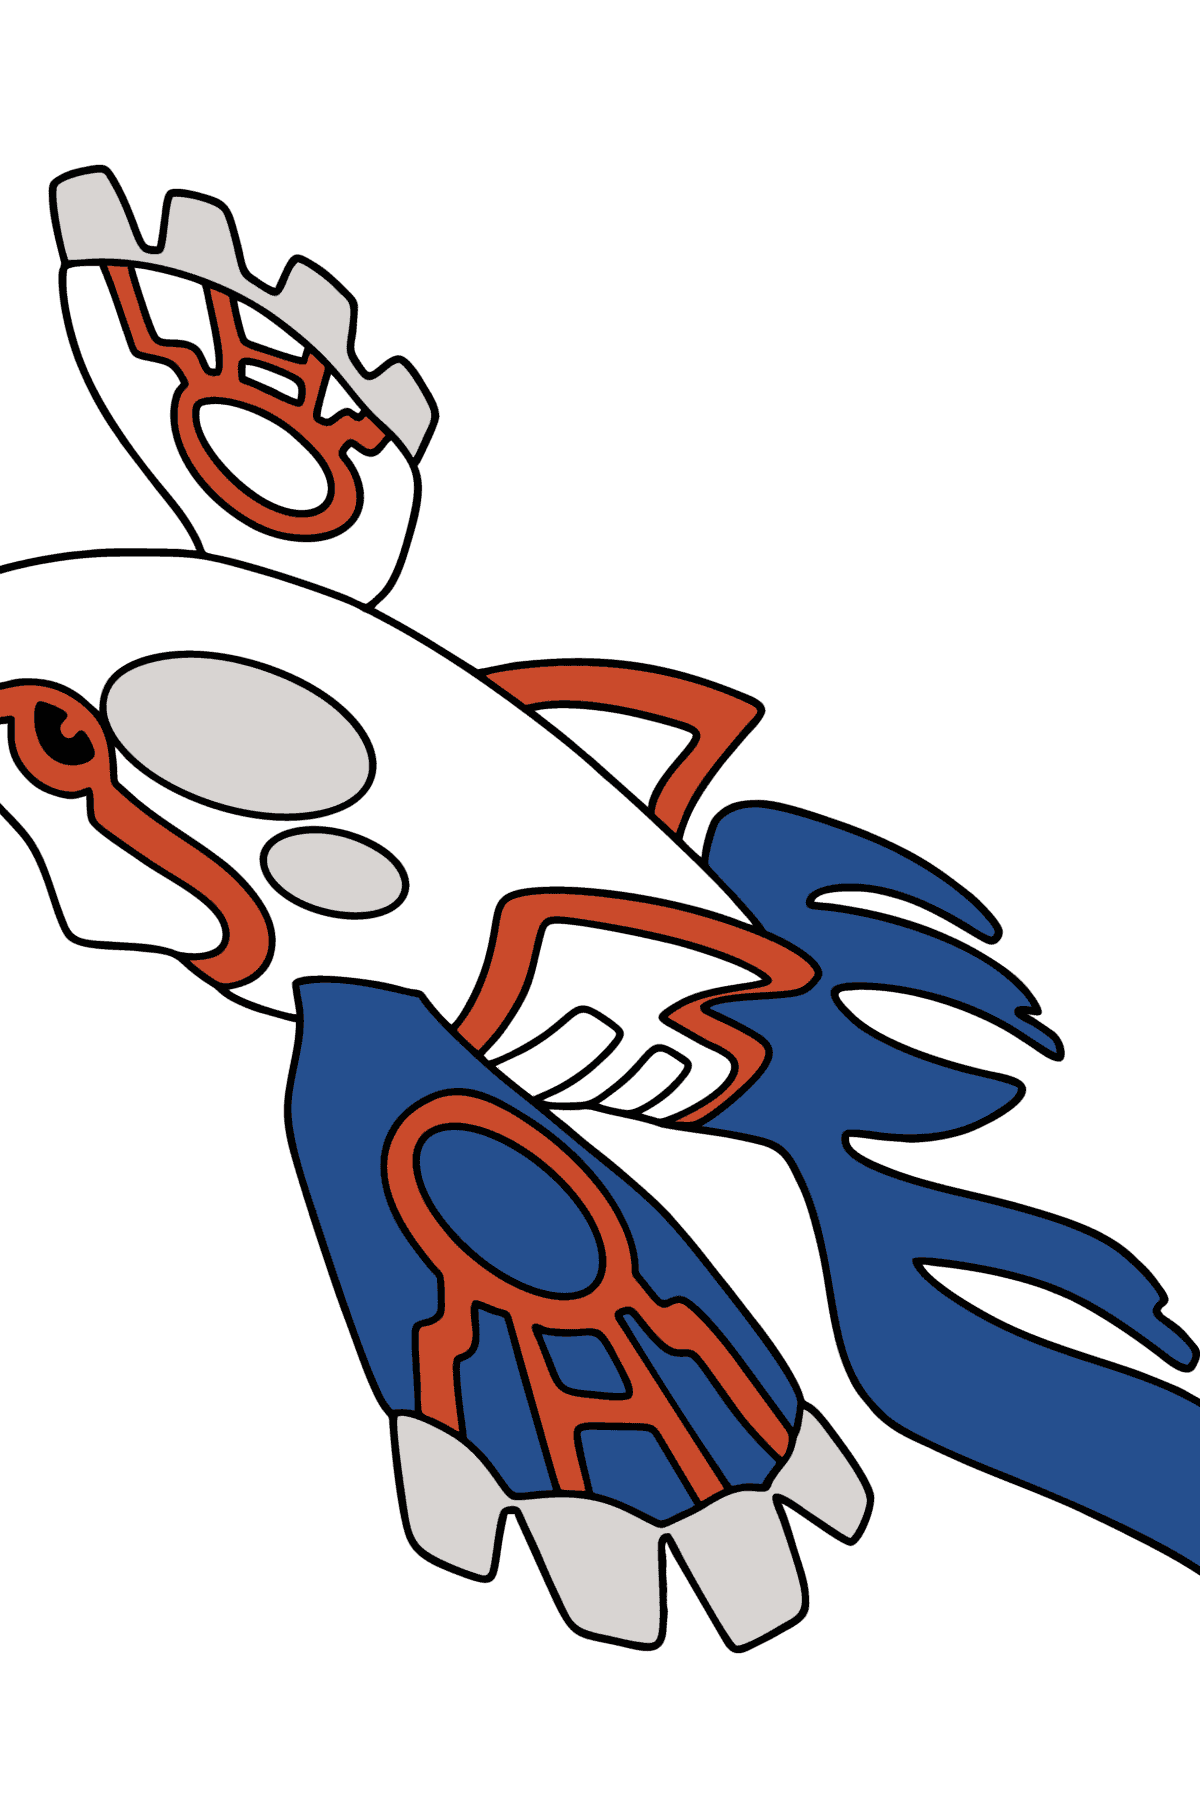 Coloring page Pokemon Go Kyogre - Coloring Pages for Kids